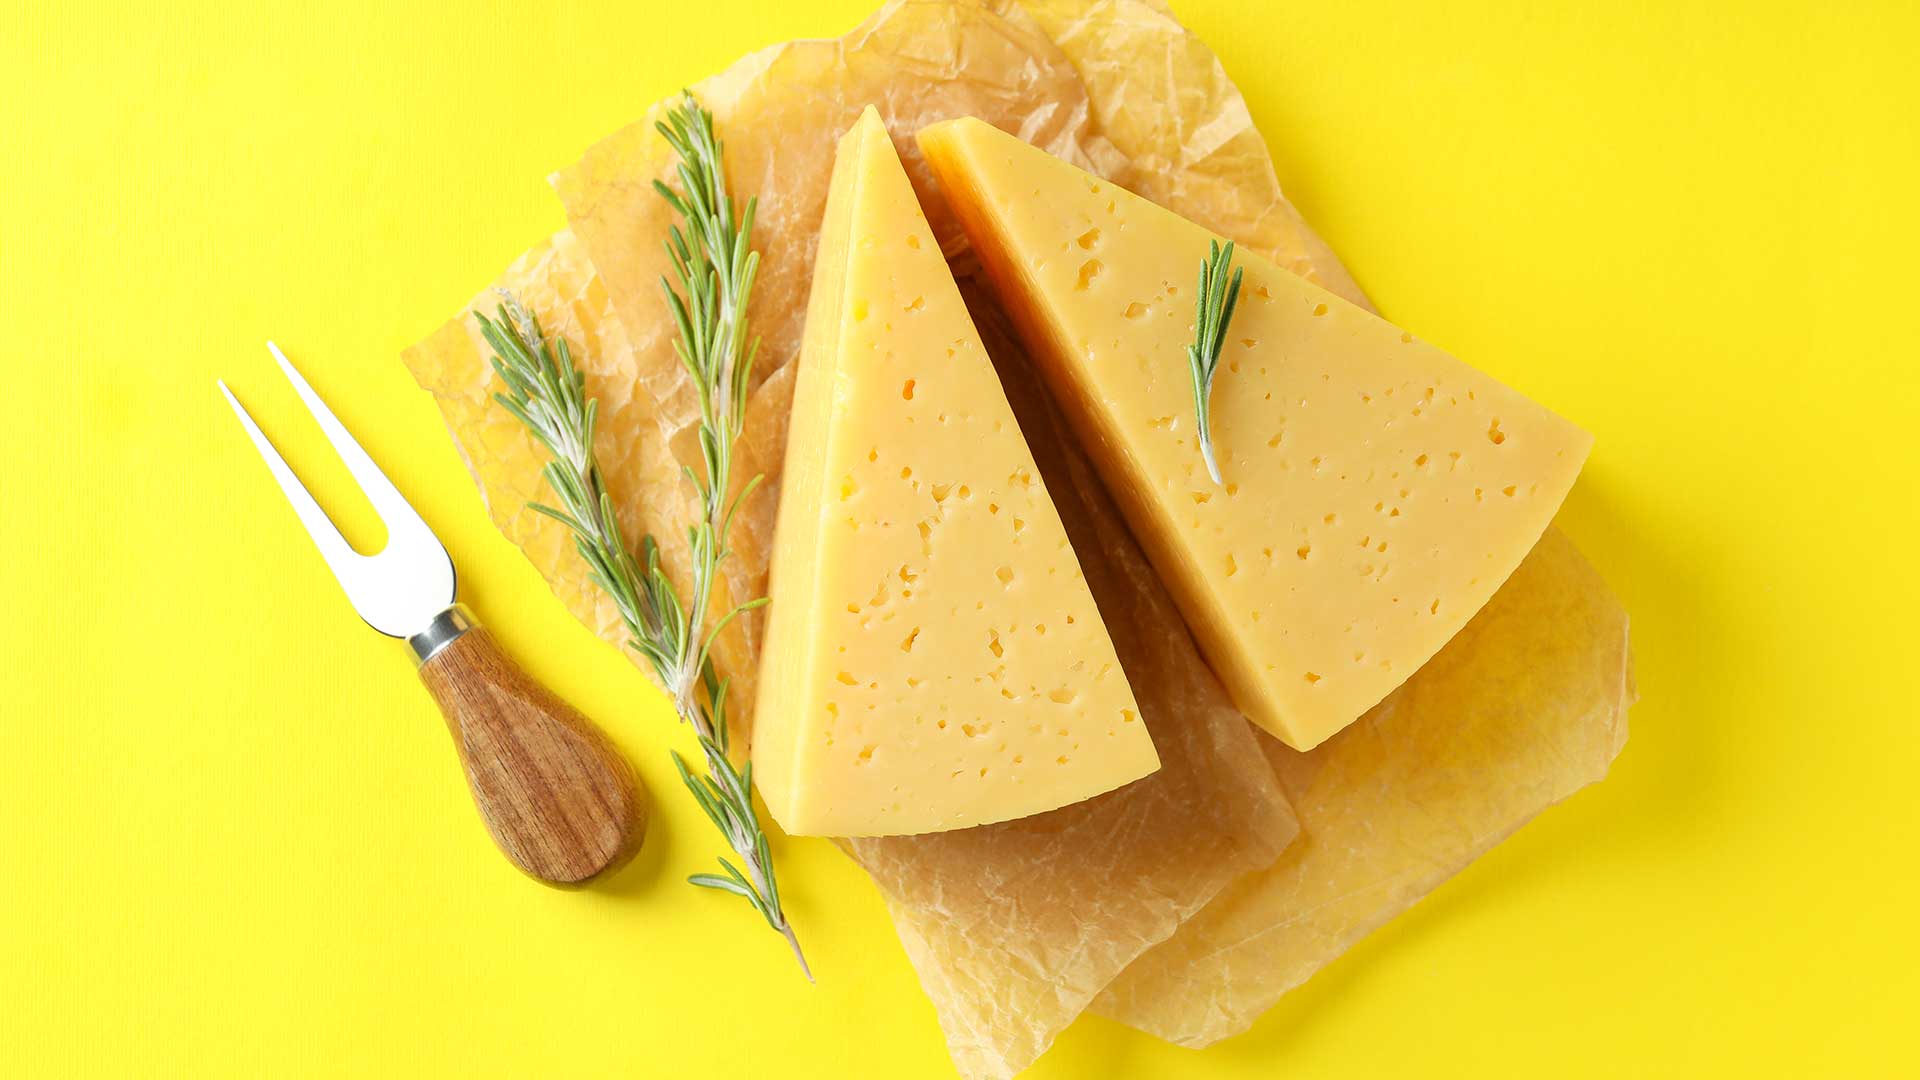 Two parmesan cheeses with rosemary garnish. 